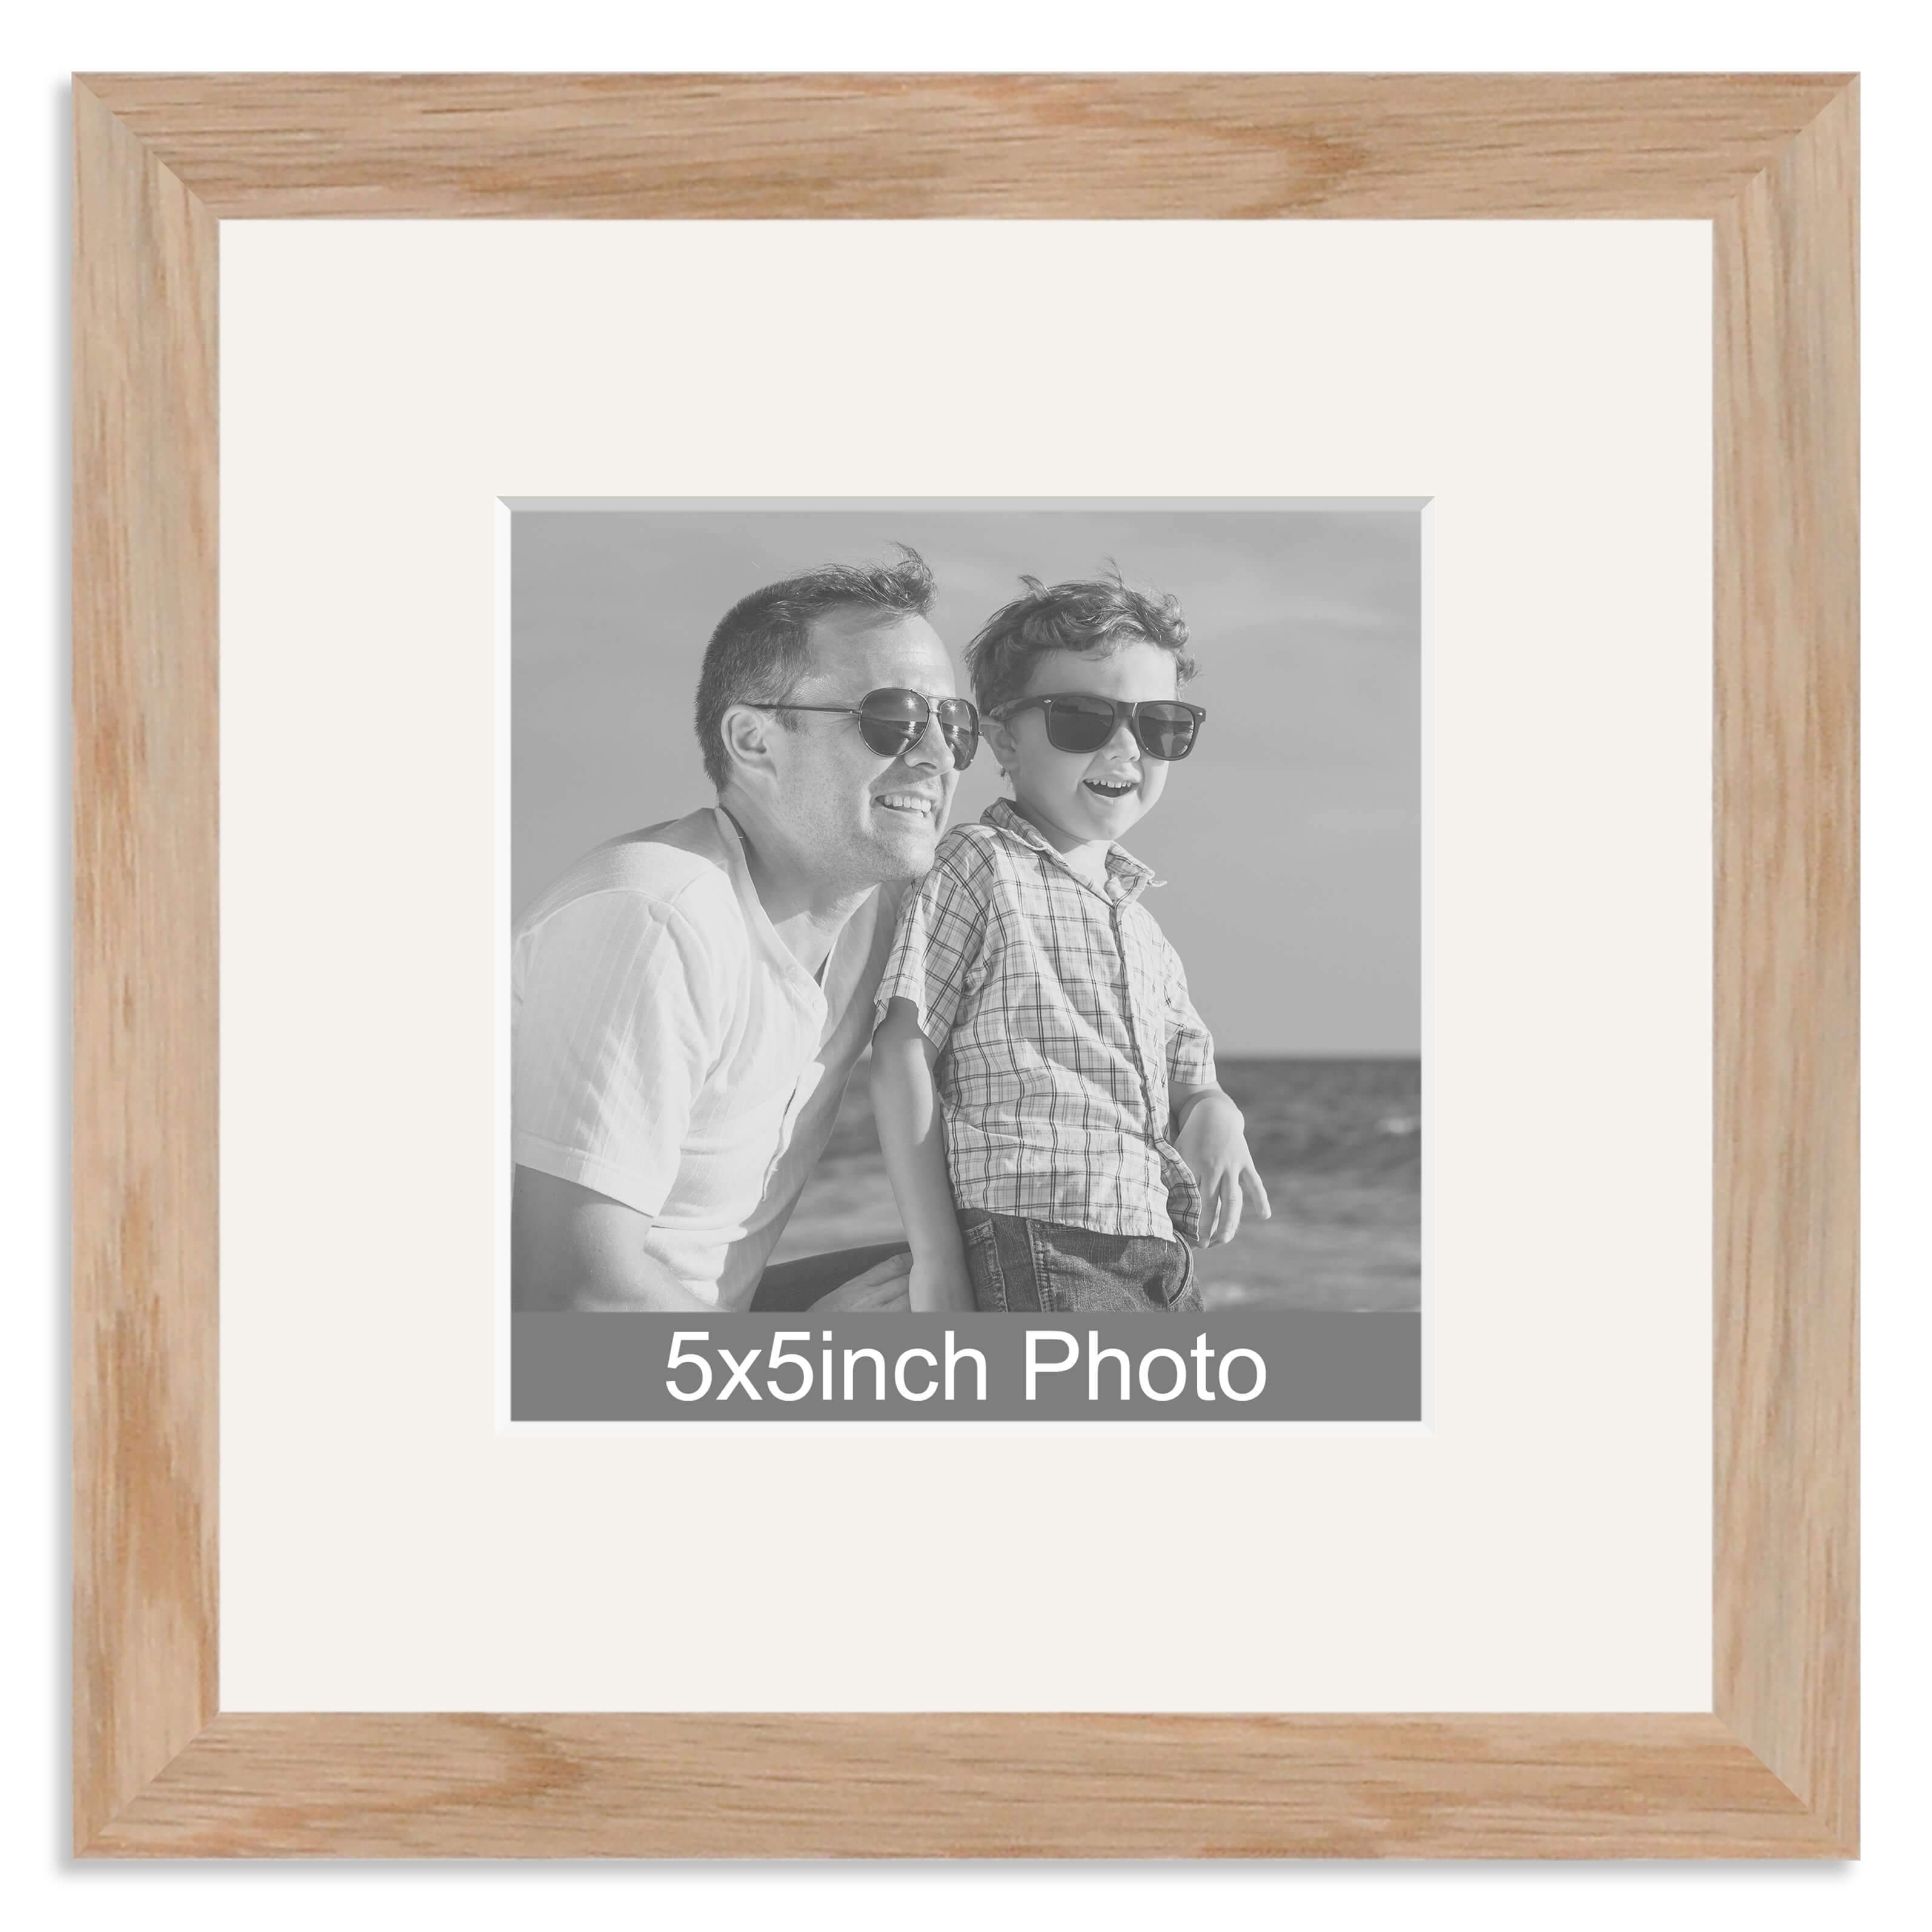 Solid Oak Photo Frame with mount for a 5x5in Photo – No Photo required